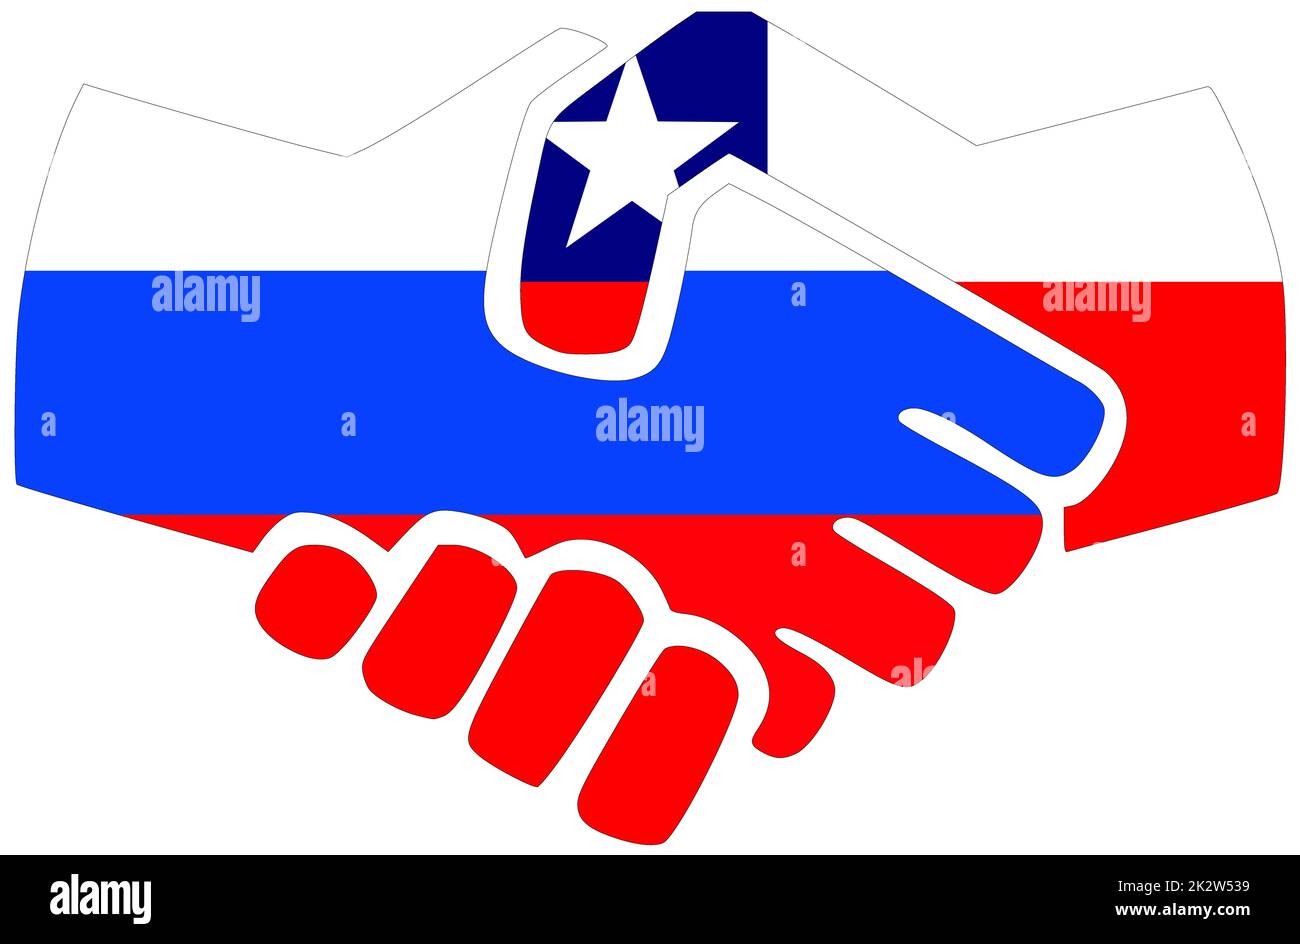 Russia - Chile : Handshake, symbol of agreement or friendship Stock Photo